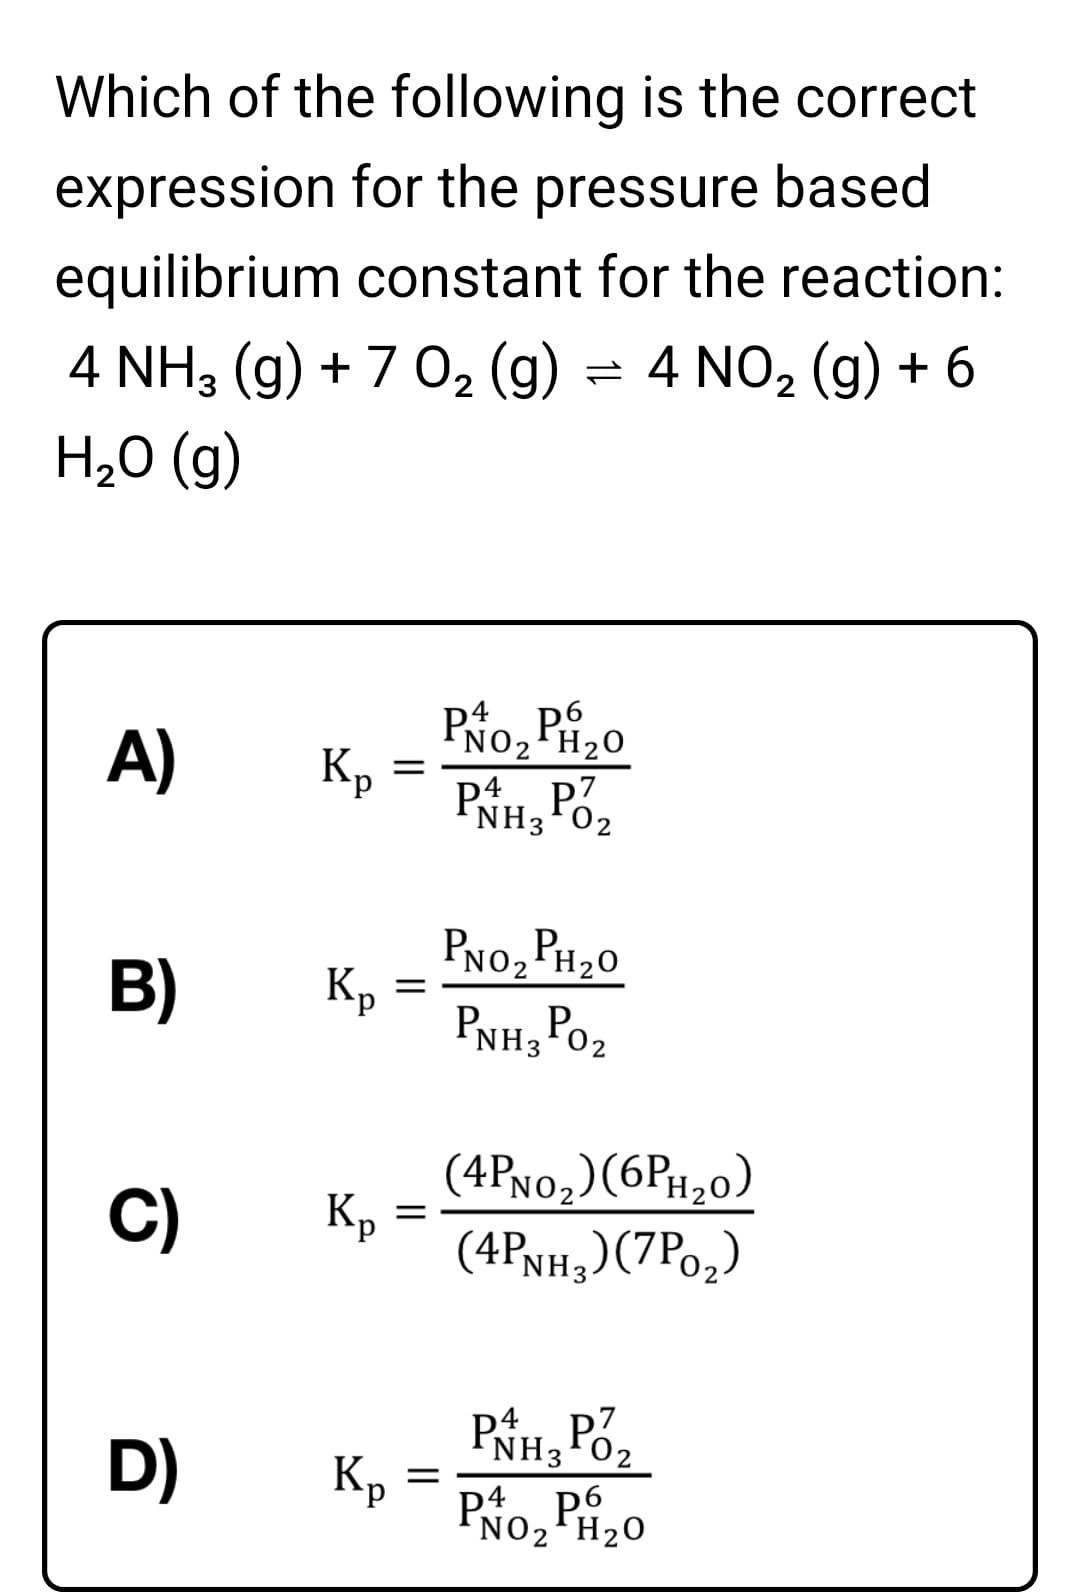 Which of the following is the correct
expression for the pressure based
equilibrium constant for the reaction:
4 NH3 (g) + 7 0, (g) = 4 NO2 (g) + 6
H,0 (g)
PNO2 PH20
Kp
PNH3P02
A)
PNo, PH20
Kp
PNh, Po2
B)
(4PN0,)(6PH20)
(4PNH,)(7Po,)
C)
К
Kp
PNH3 Pó2
P4. P
p4
D) Kp
NO2'H20
